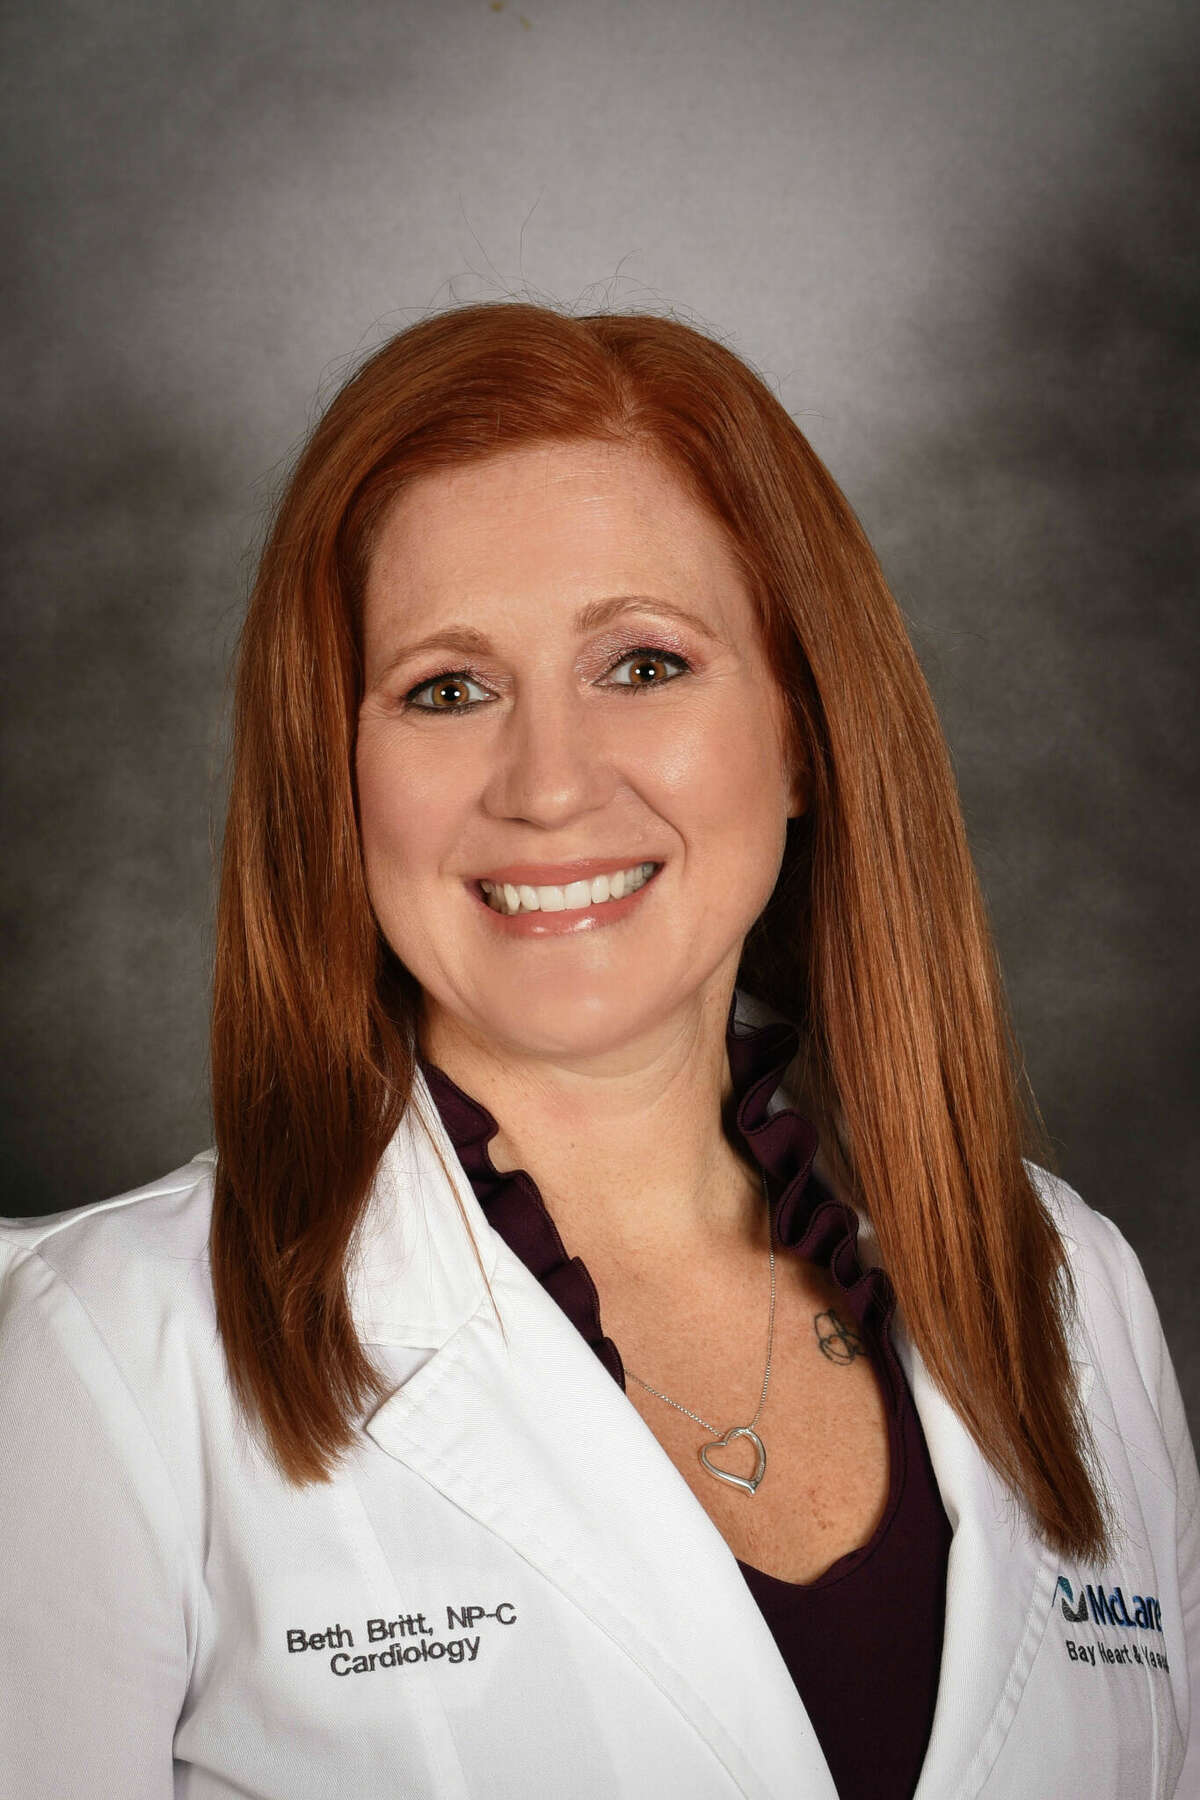 Nurse Practictioner Beth Britt has worked for McLaren for 15 years with a specialty in cardiology.